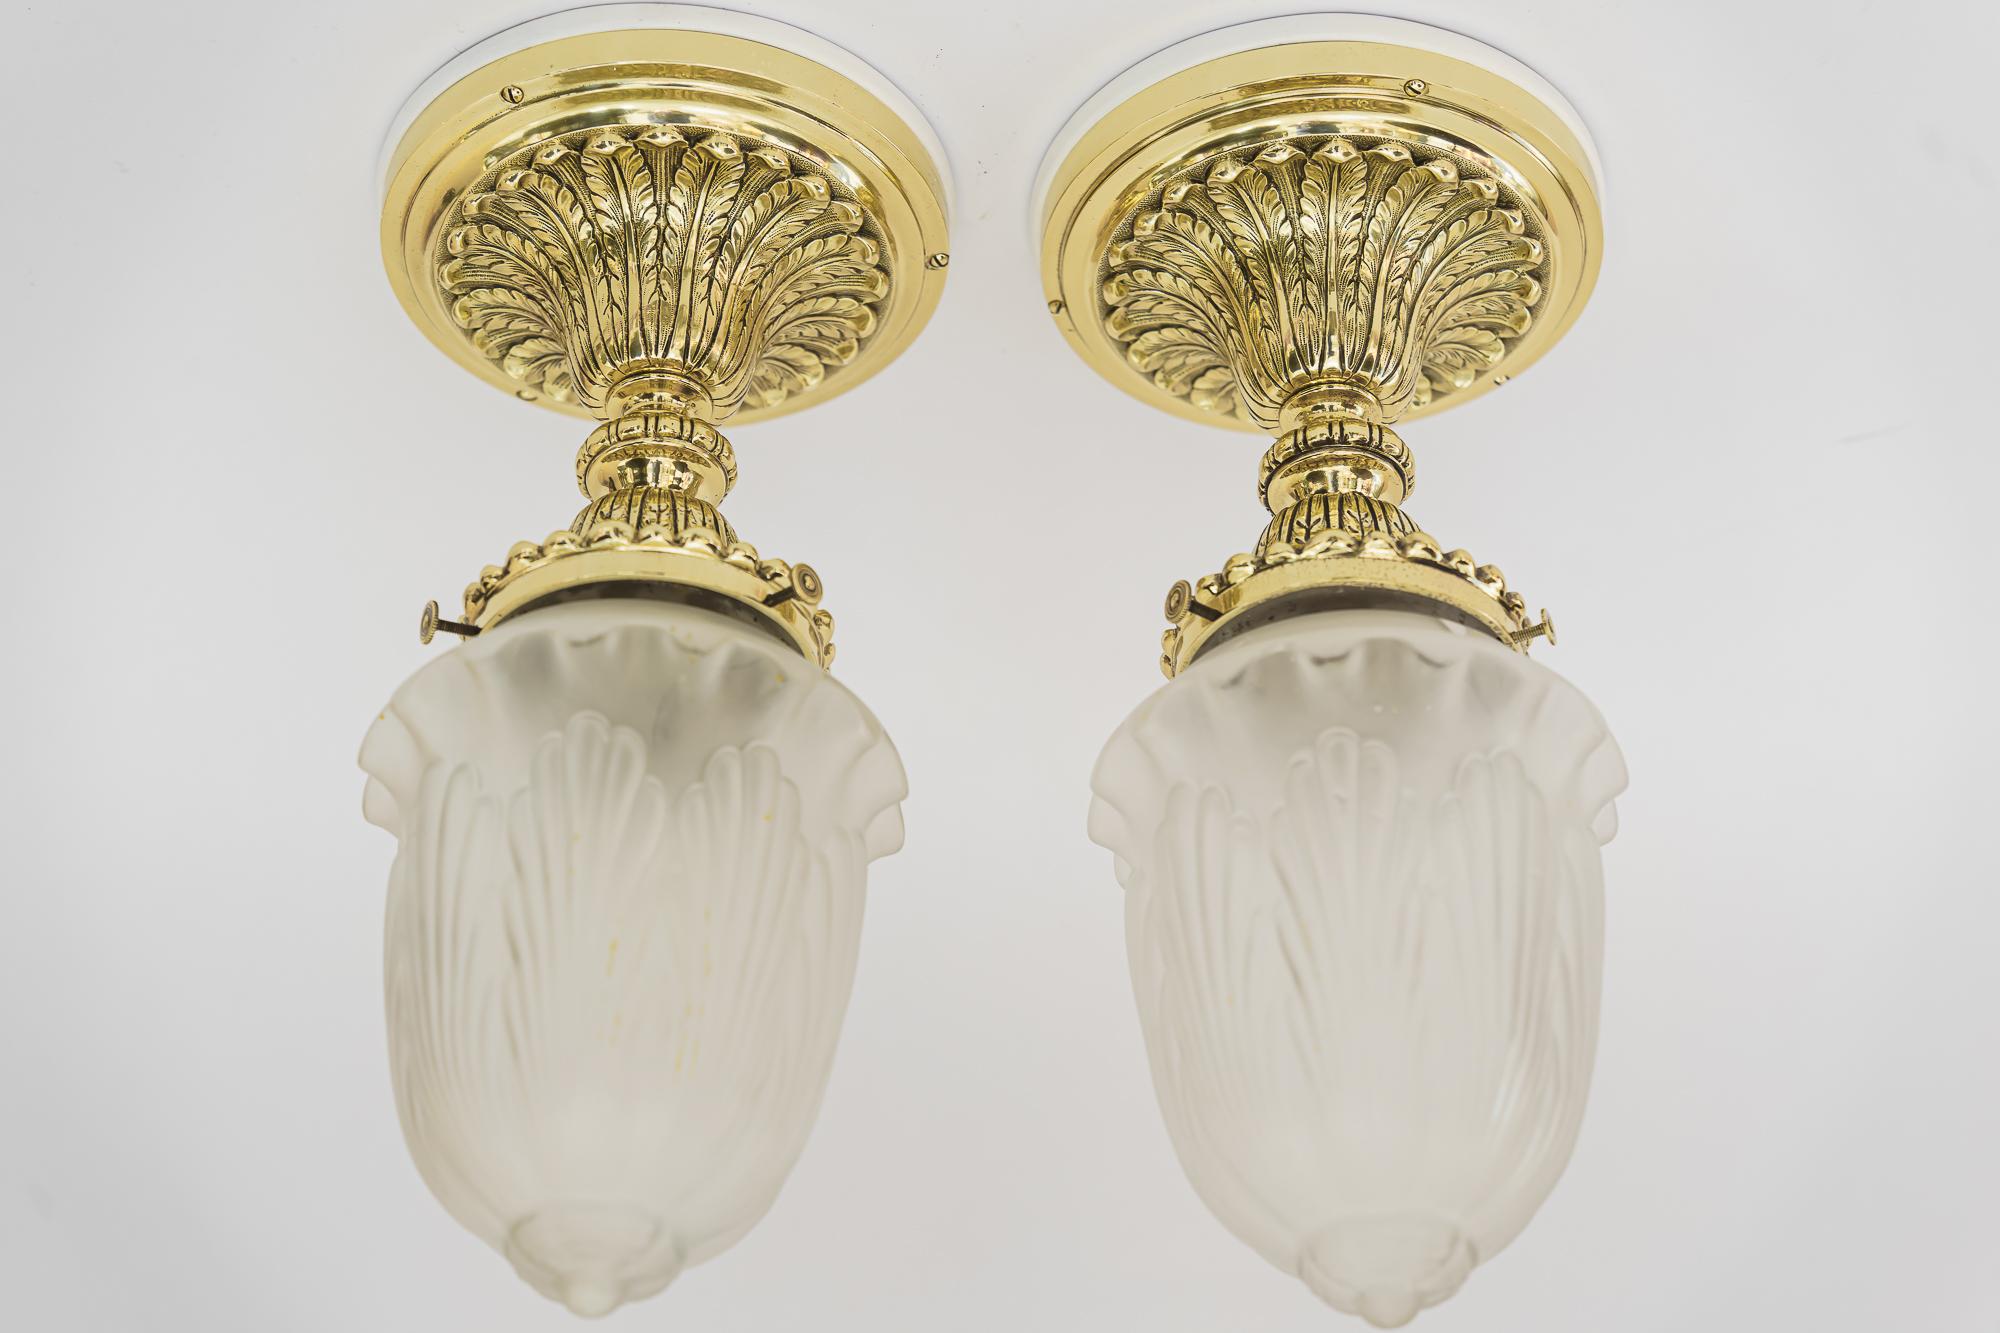 old lamps with glass shades